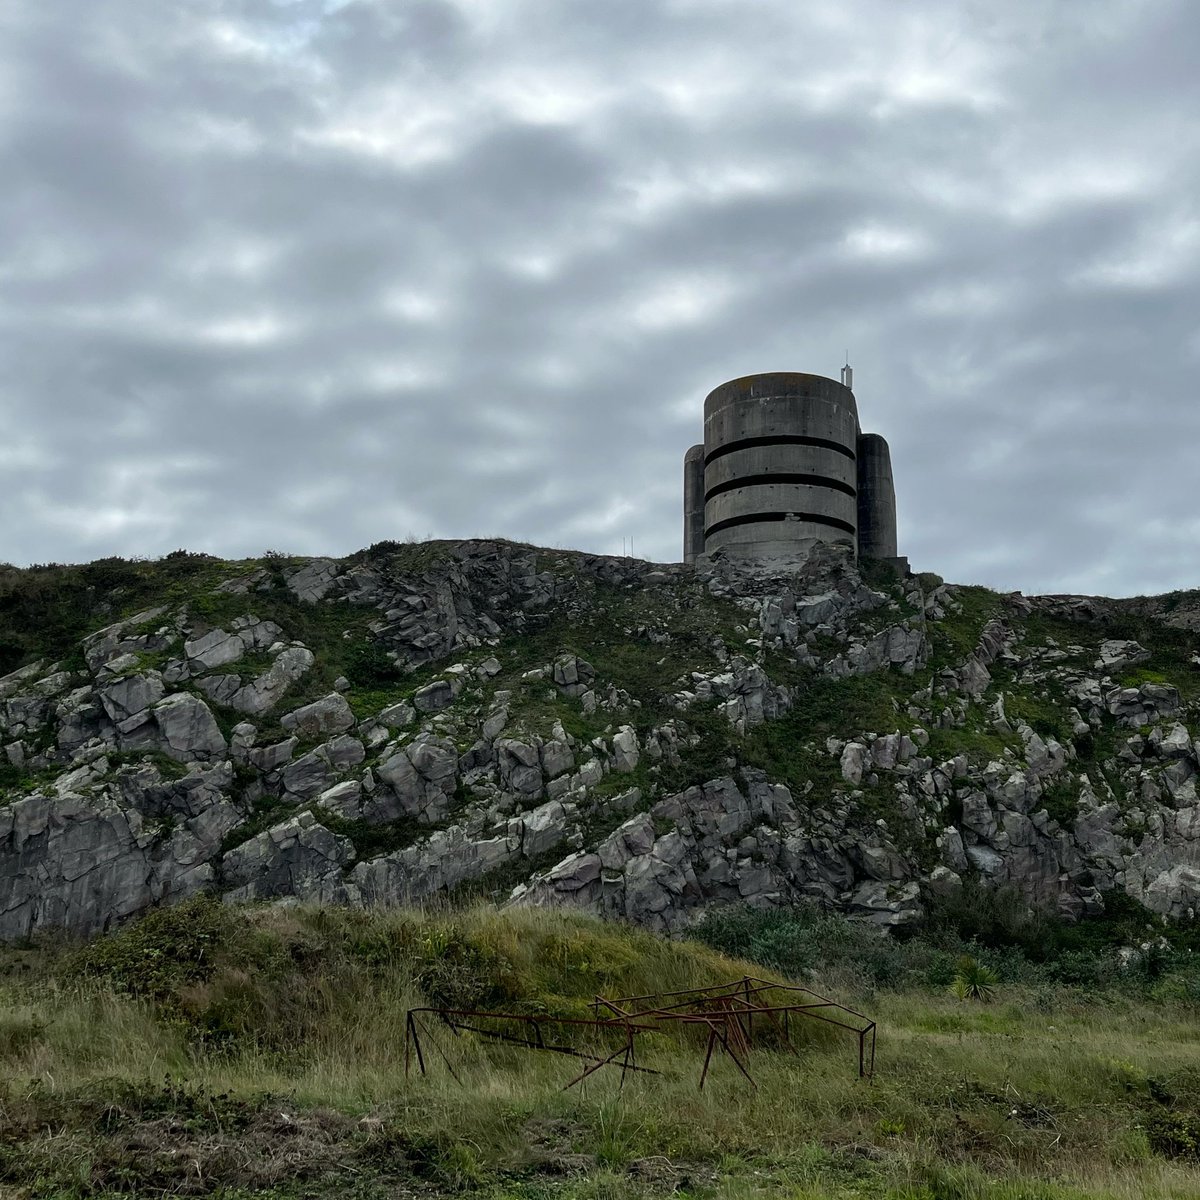 The massive Marinepeilstand 3 or MP3 (Naval direction finding tower 3). Each floor was intended to observe the fire of a medium coastal artillery battery within five similar positions which were never constructed.